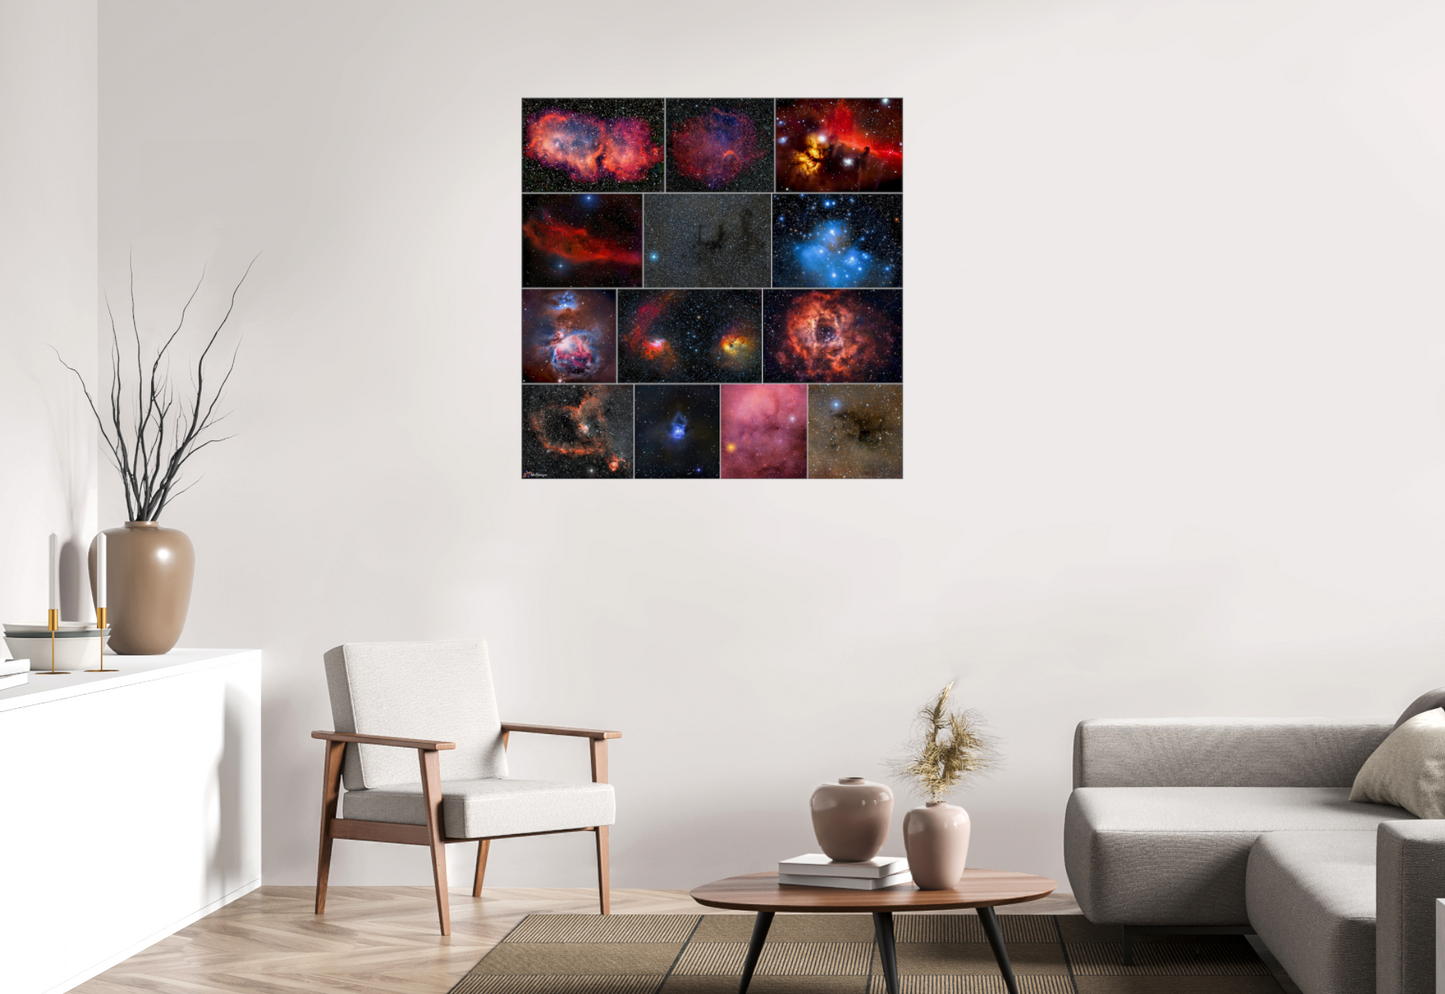 Milky Way nebulae on the wall